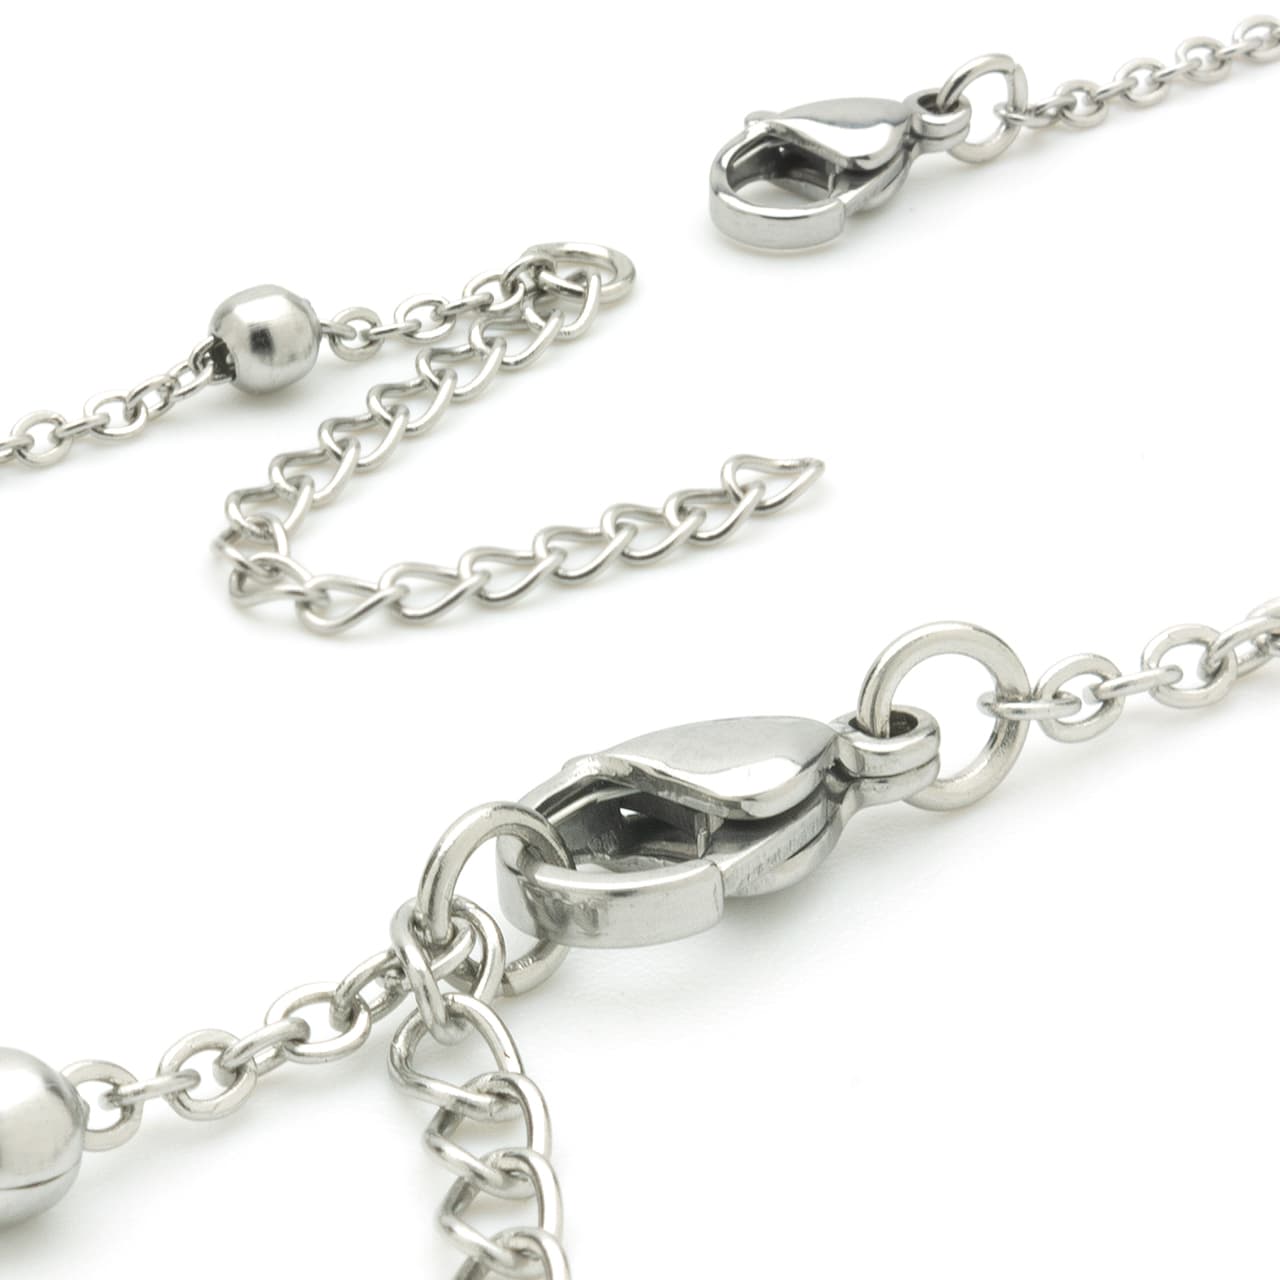 Necklace Chain Lanyard | Stainless Steel Metal | Retractable Clip